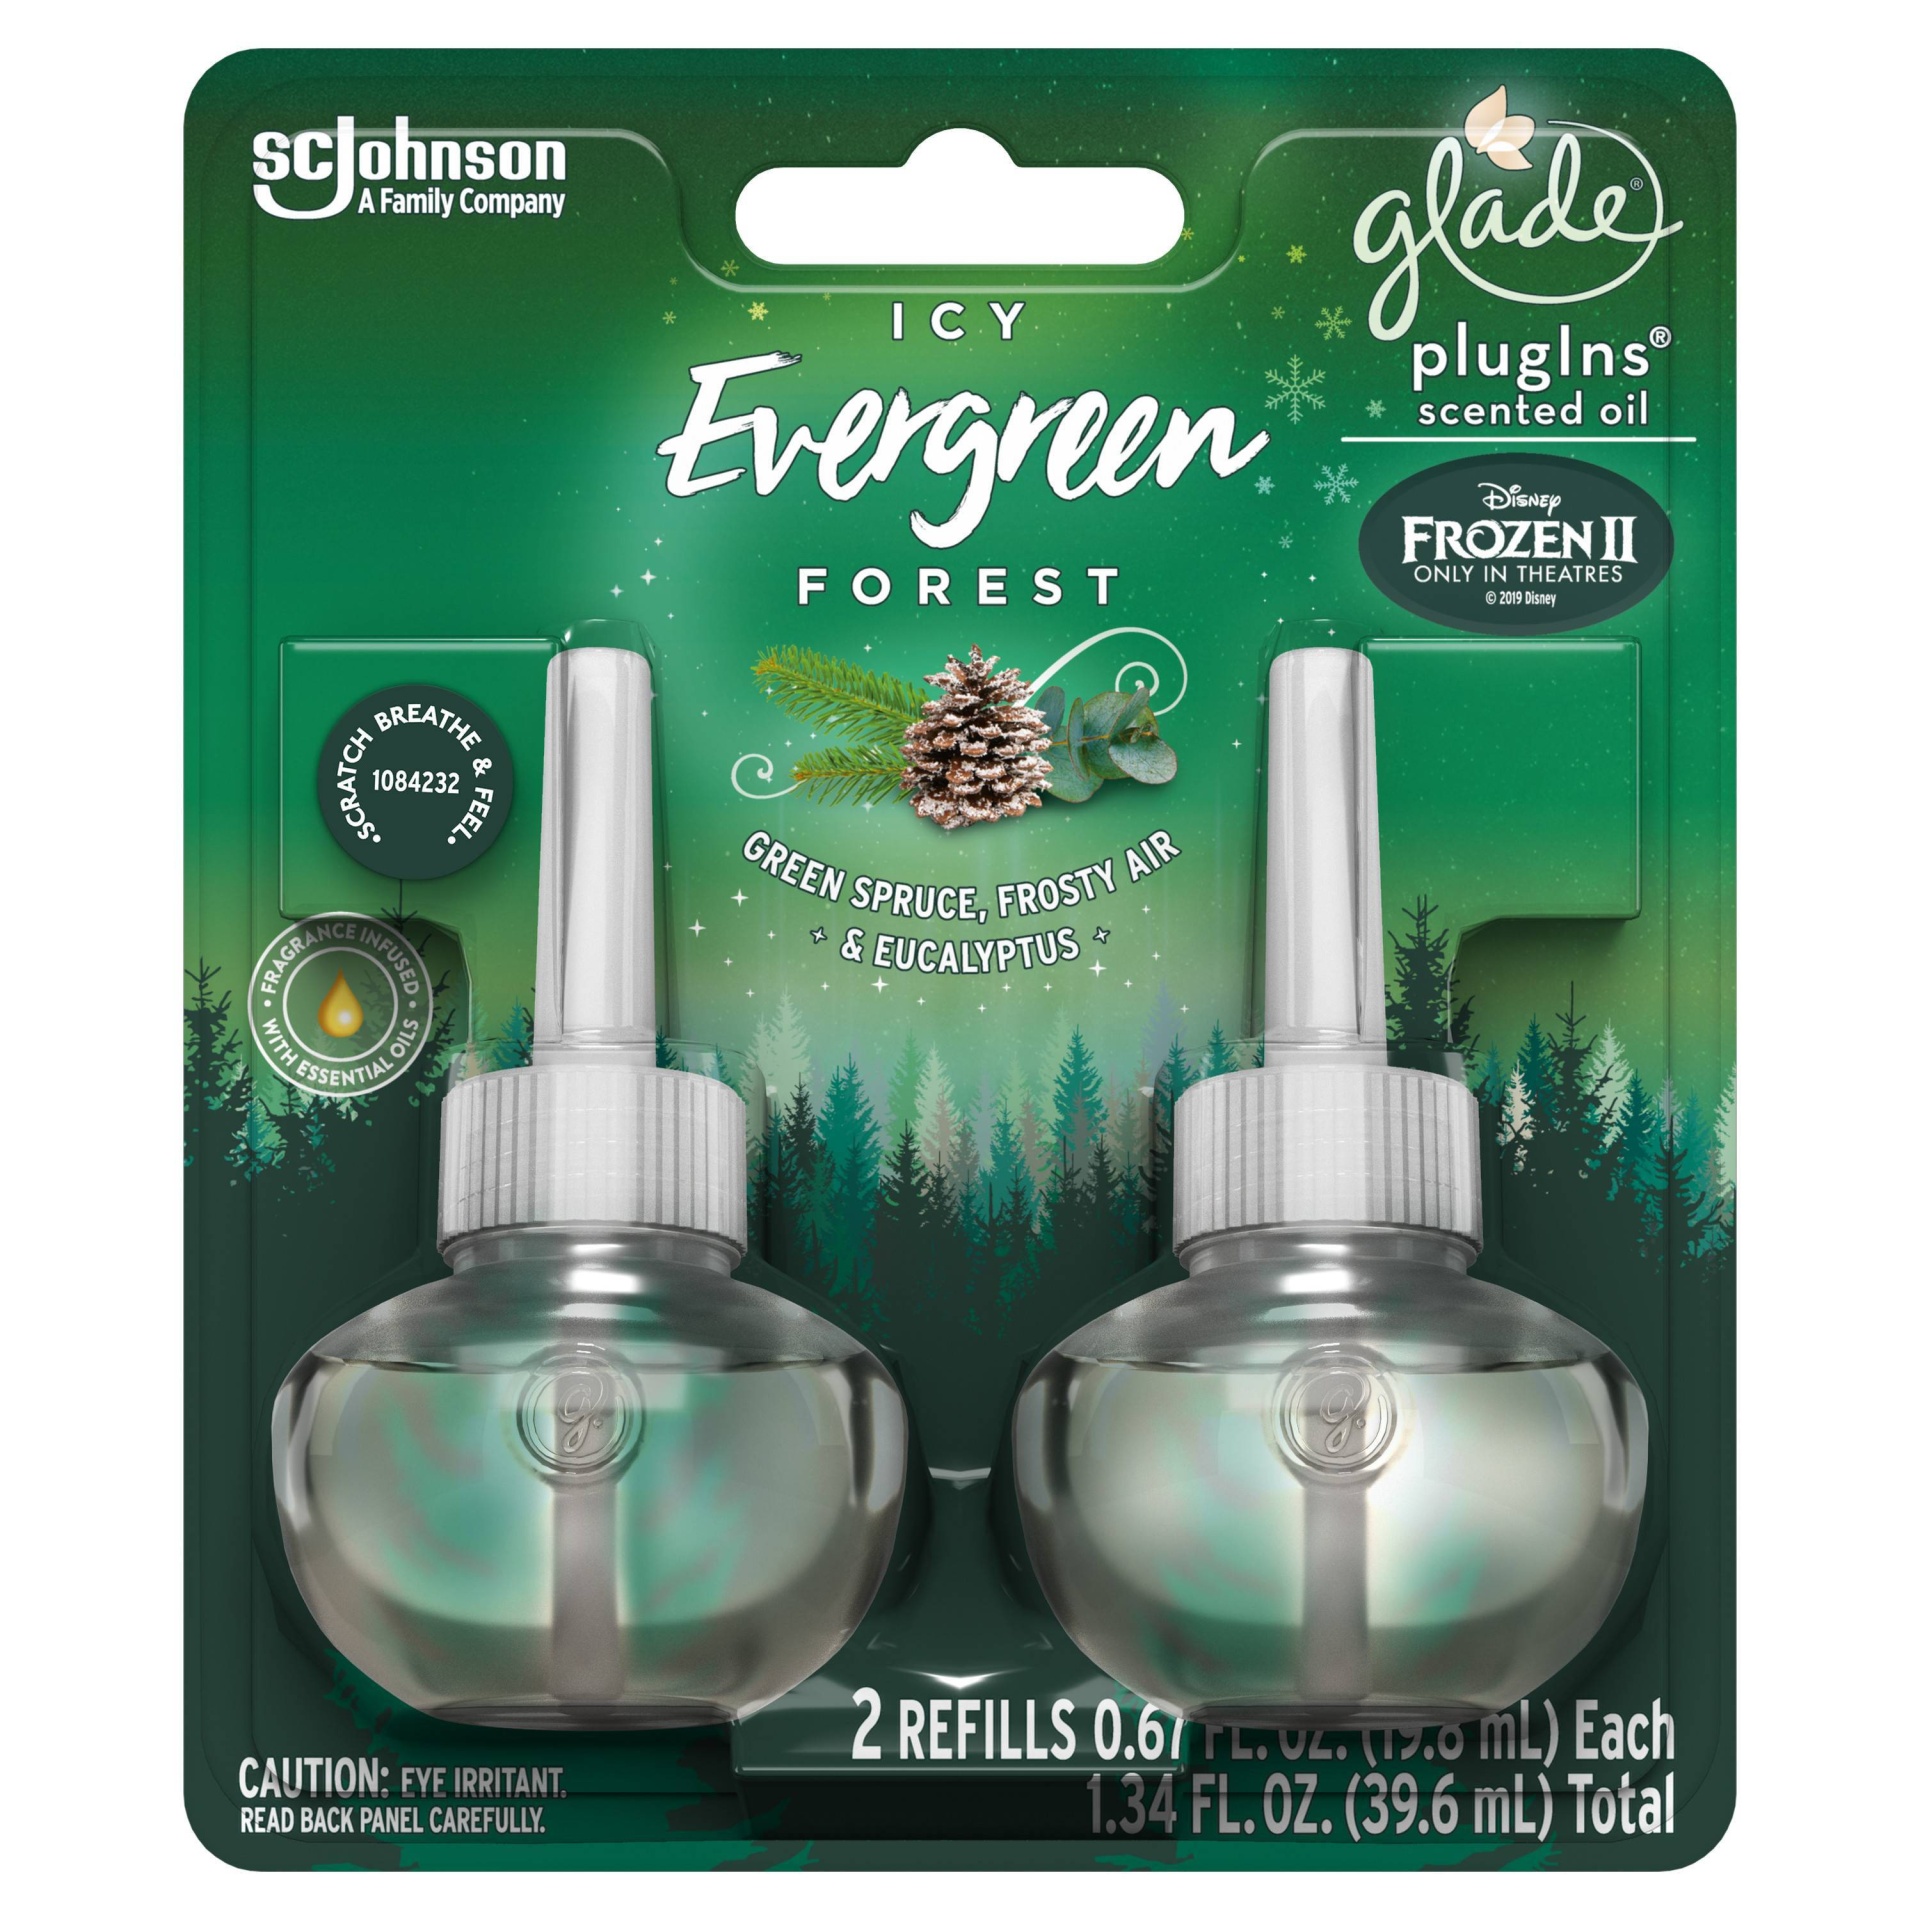 slide 1 of 1, Glade PlugIns Icy Evergreen Forest Scented Oil Refills, 1 ct